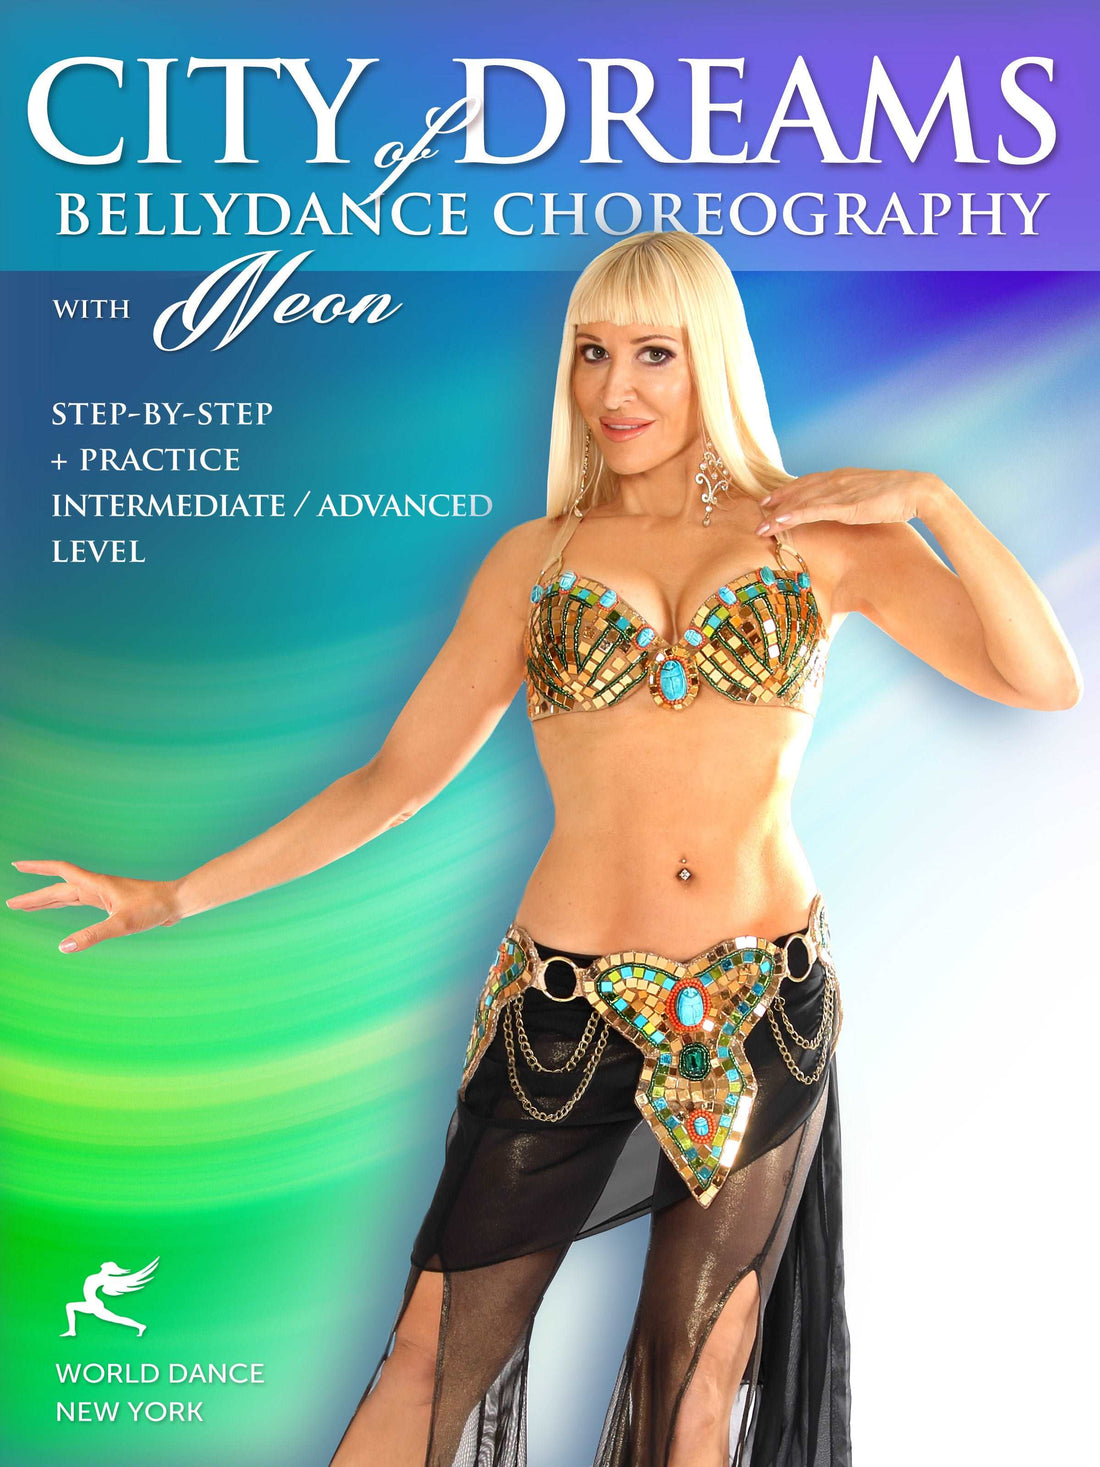 City of Dreams: An Evocative Belly Dance Choreography by Neon - World Dance New York